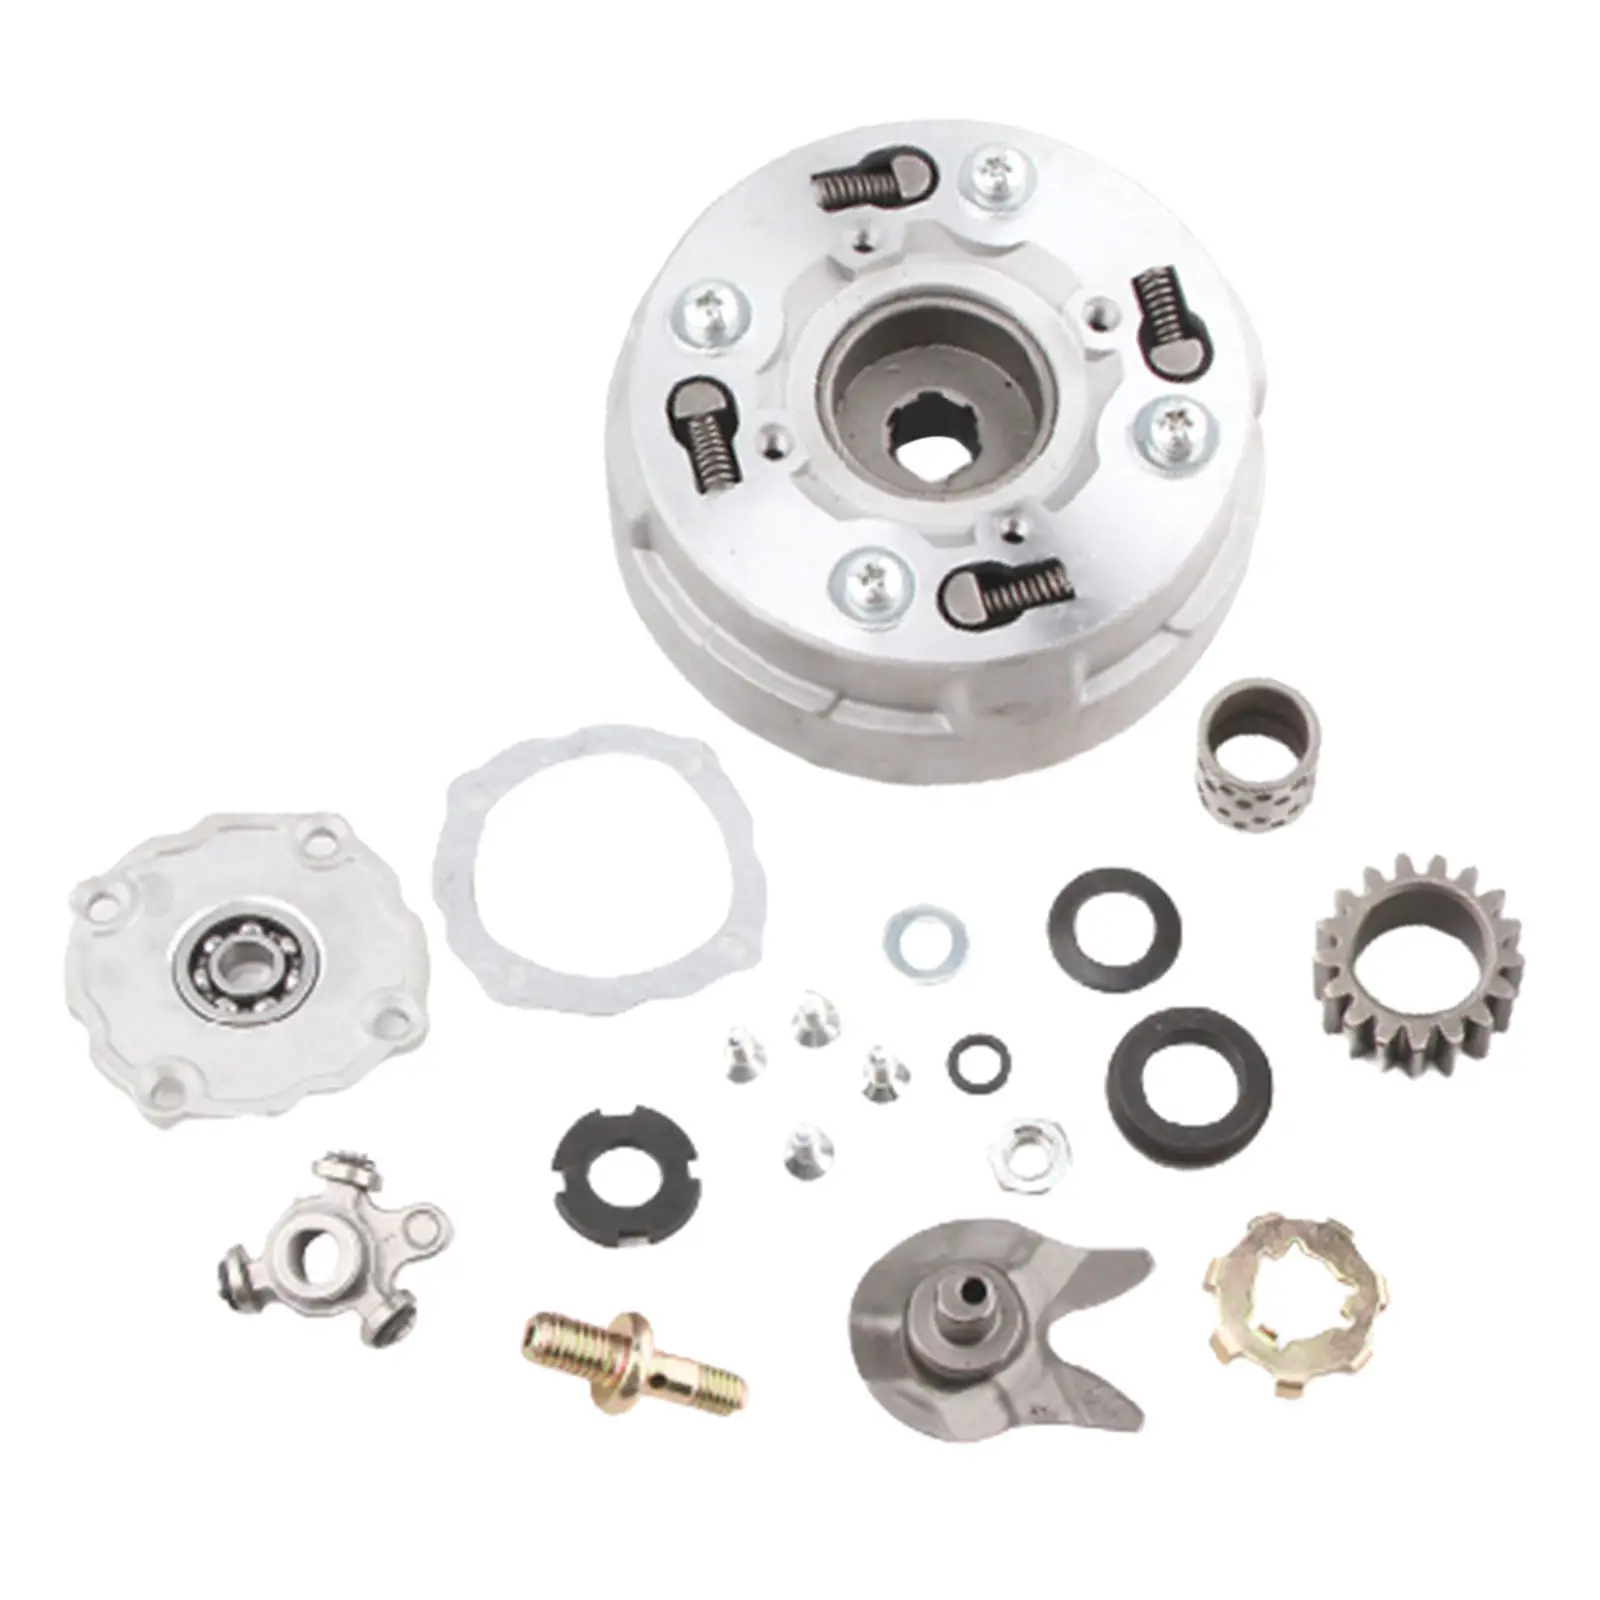 Semi Automatic Clutch Assembly for 90cc ATV, Scooters, Quad Dirt Bikes Parts